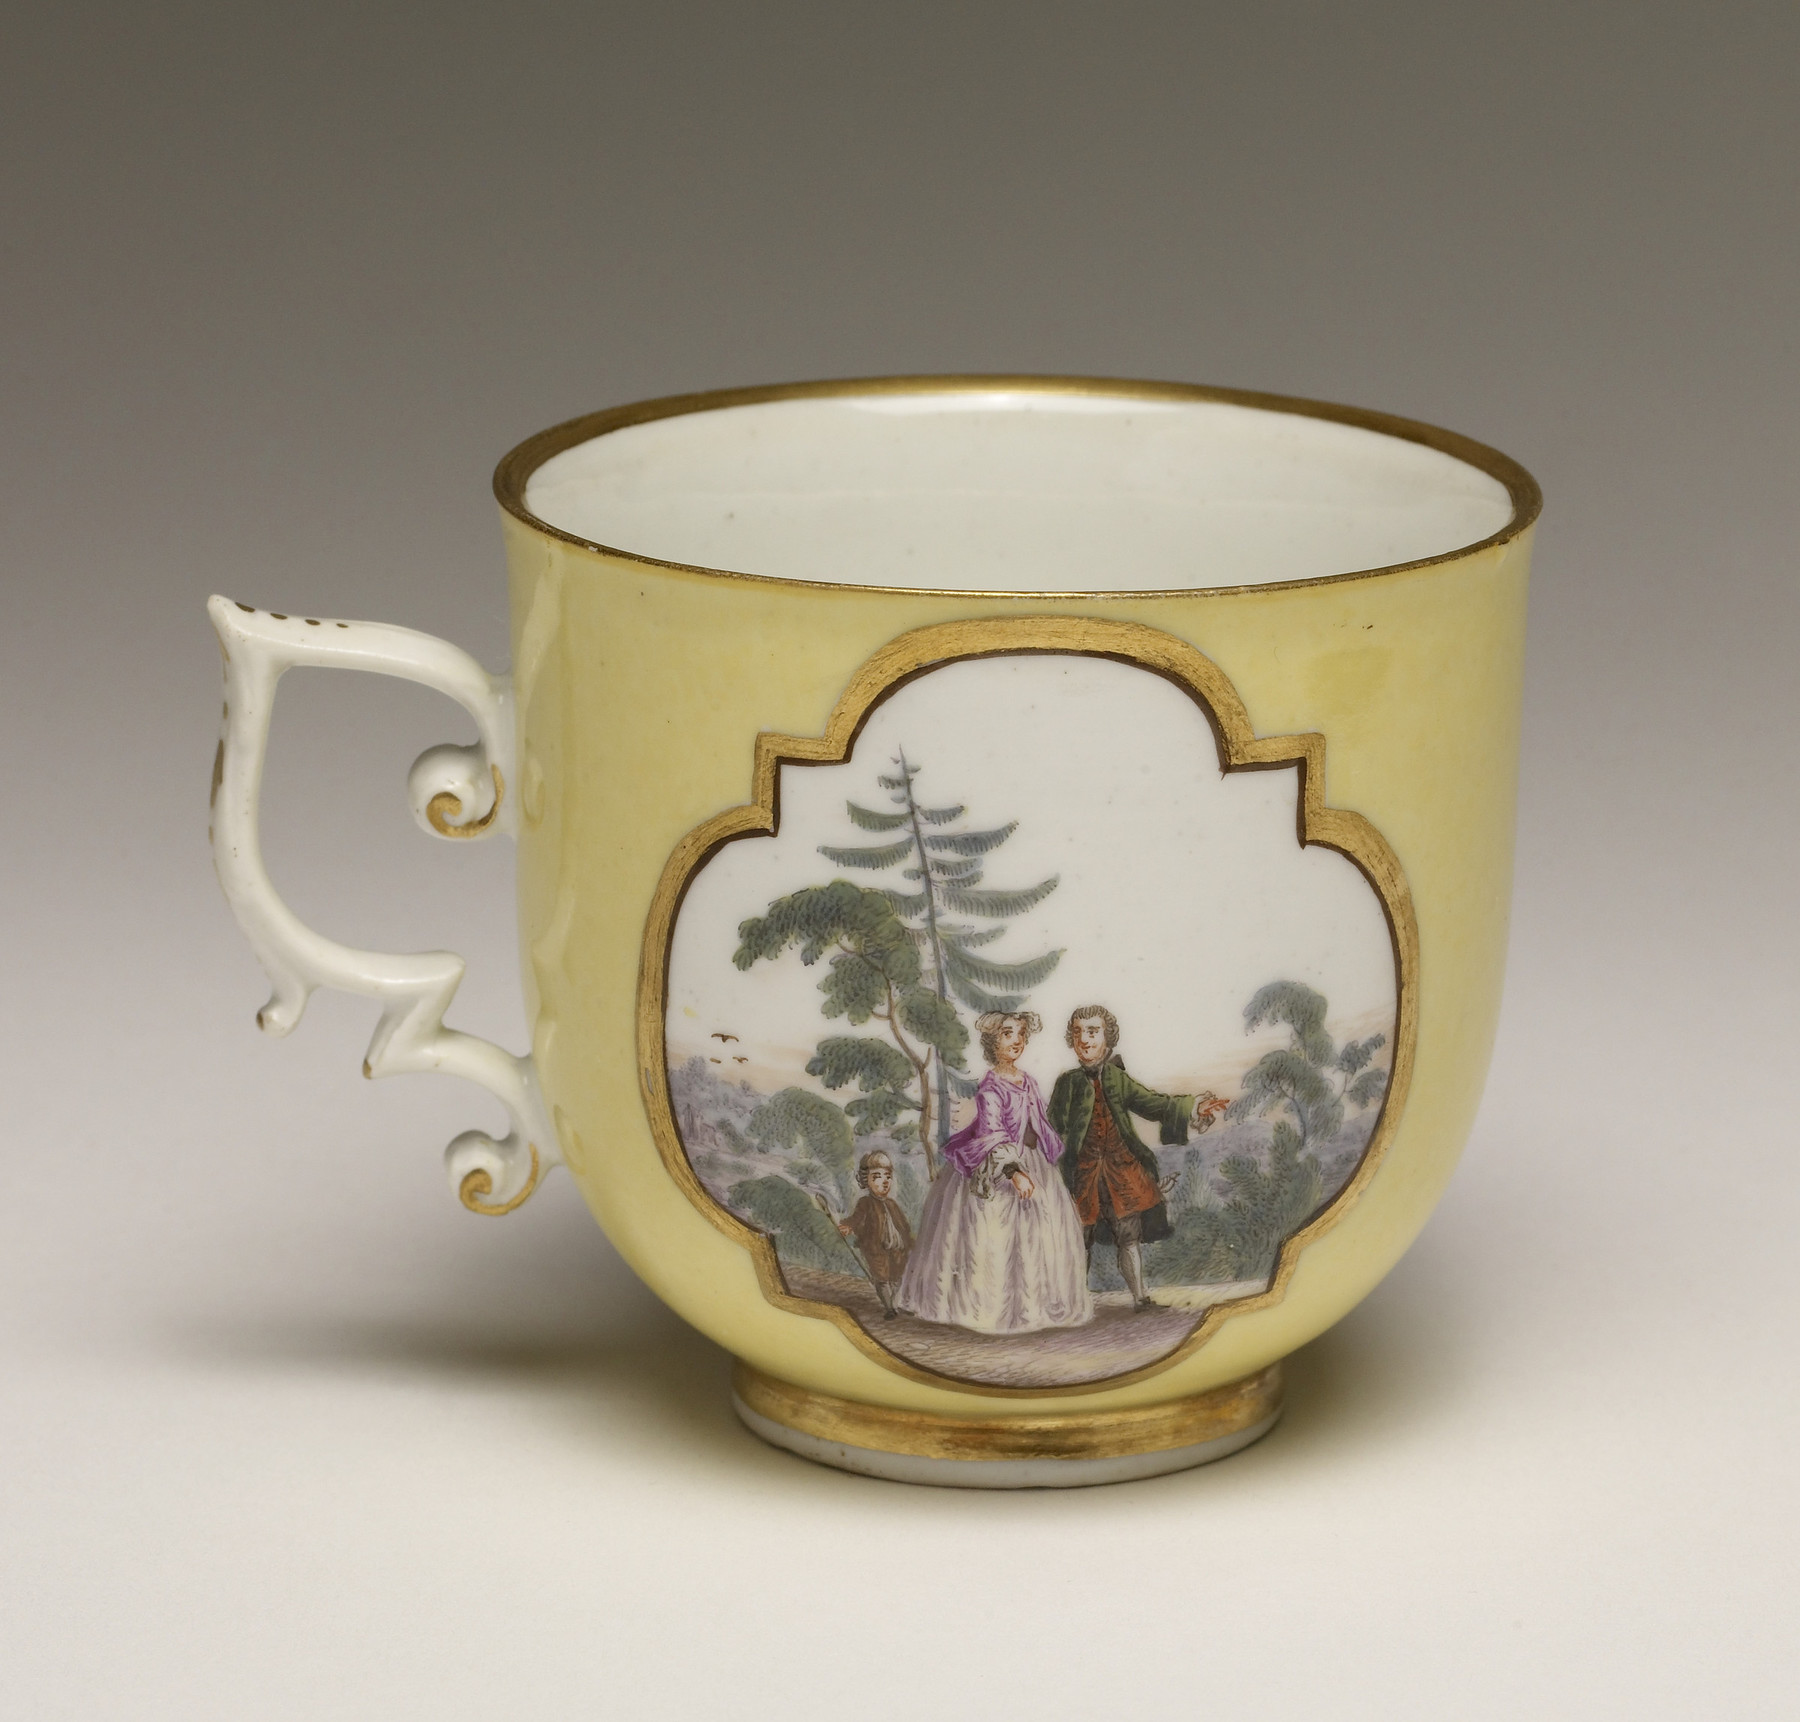 Image for Cup and Saucer with Figures in Middle Eastern Dress